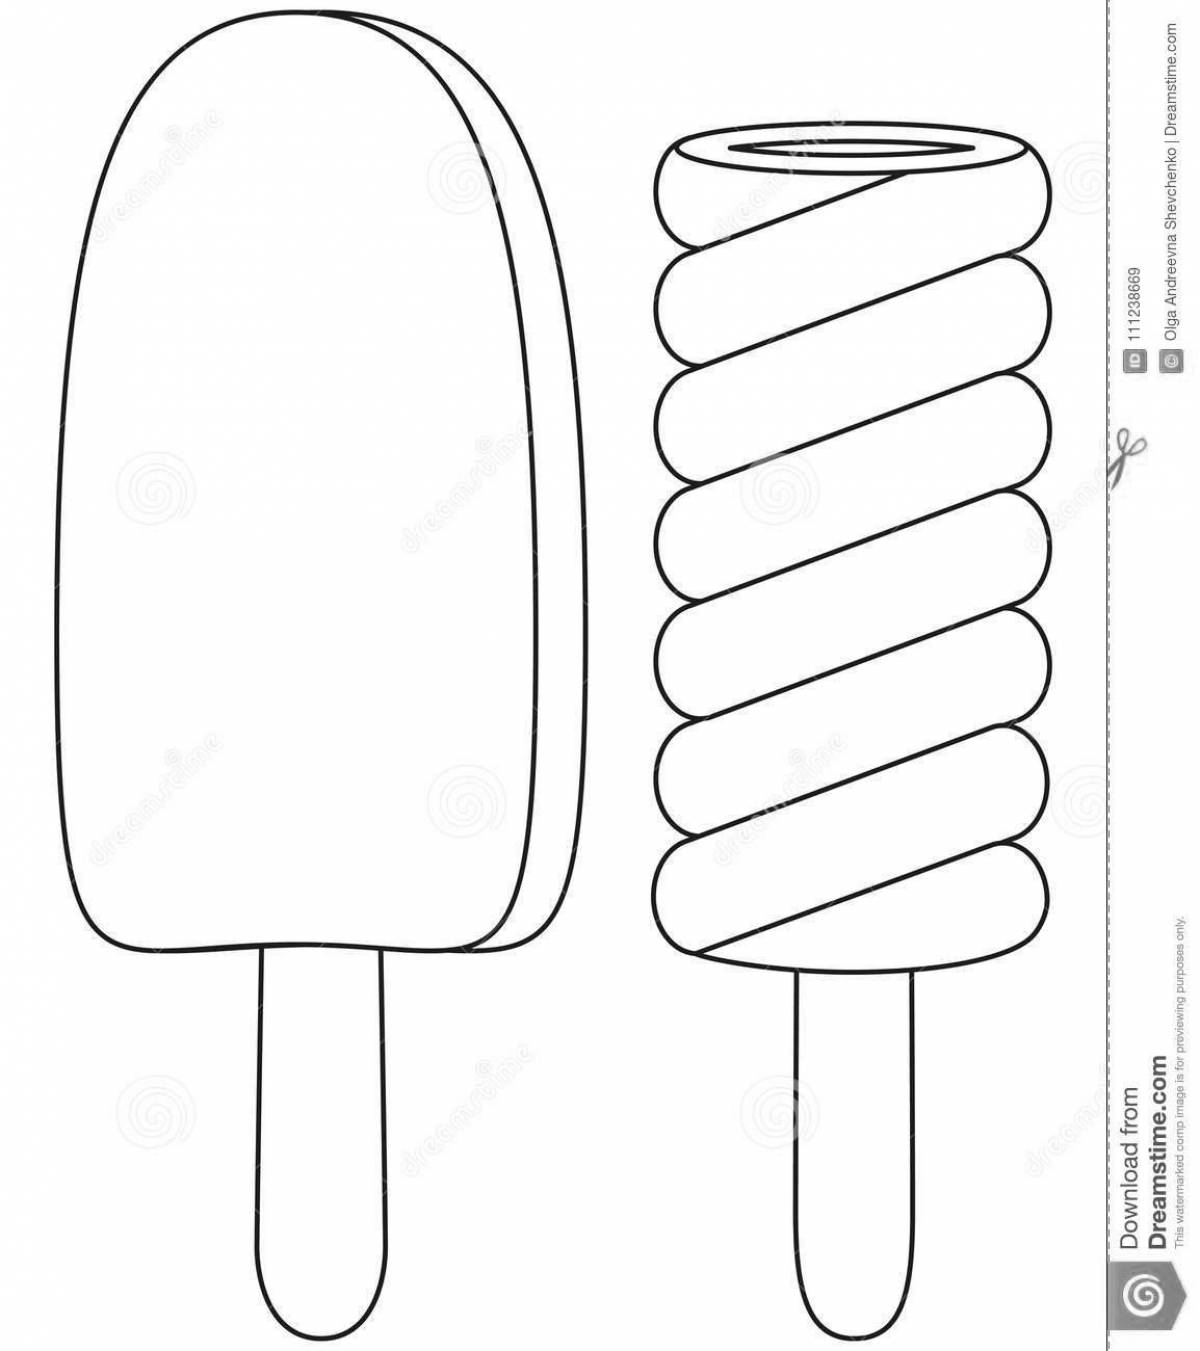 Playful popsicle coloring for kids